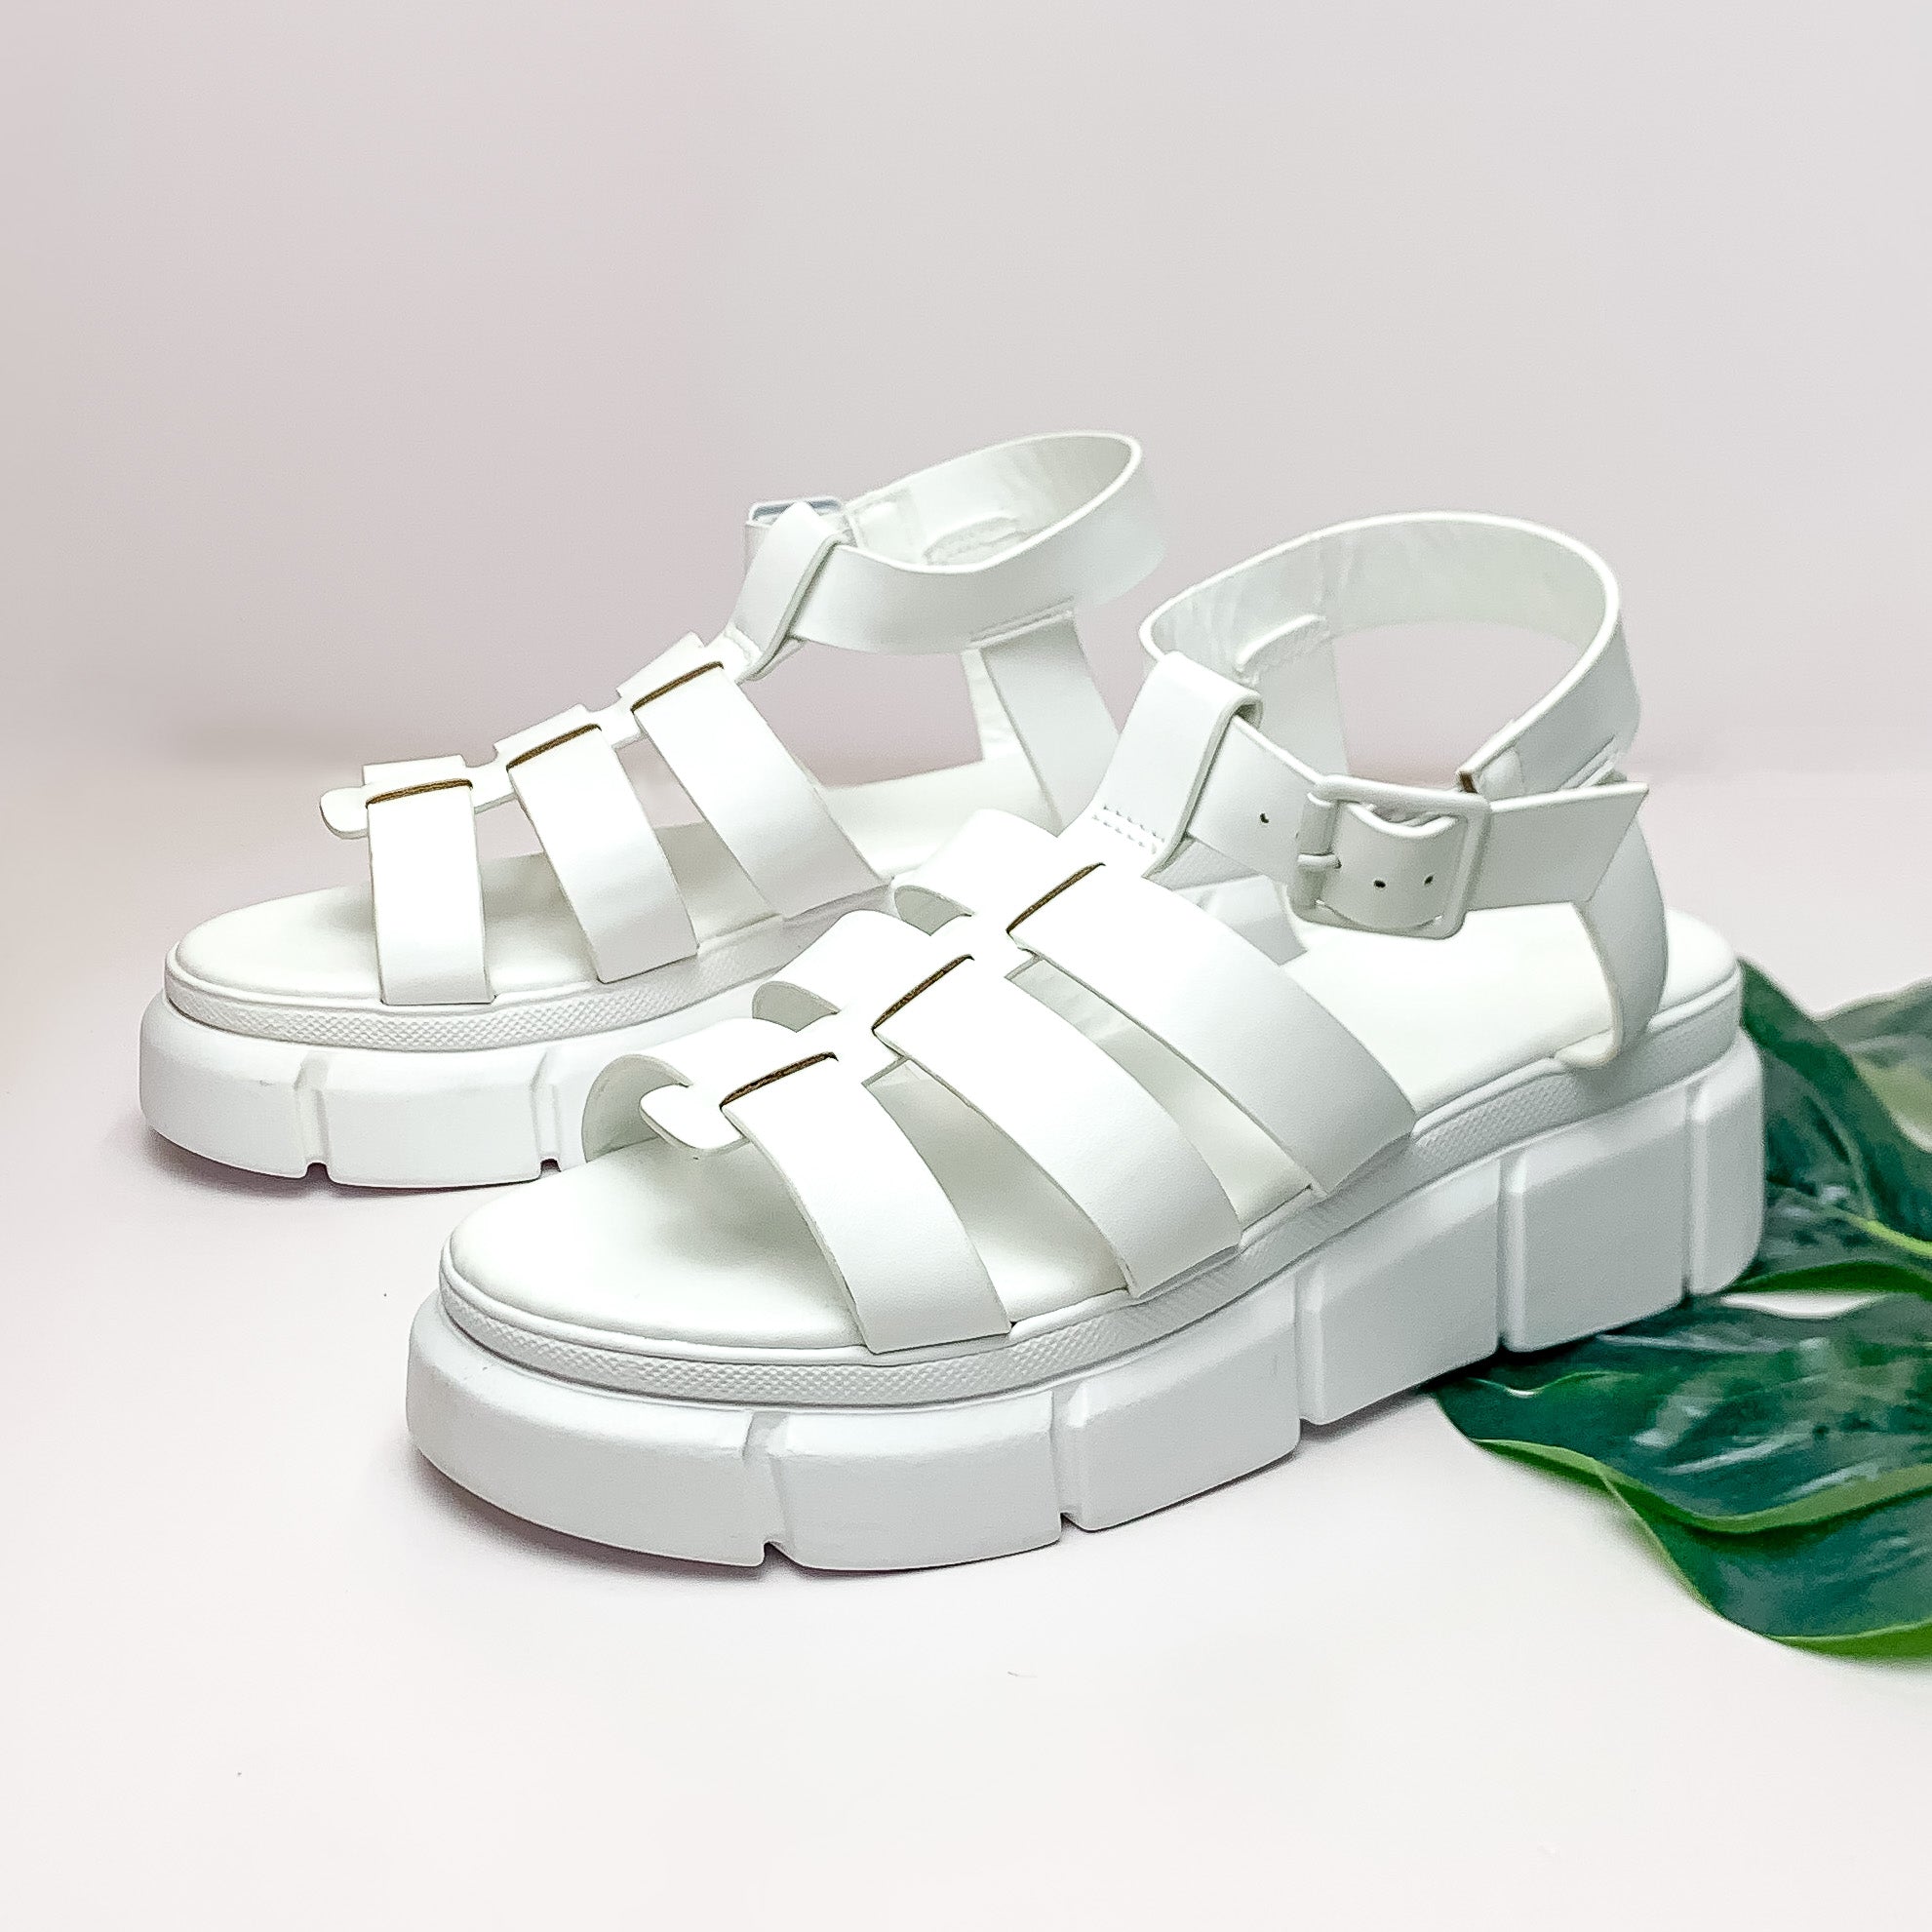 Pictured is a pair of platform, gladiator sandals with an adjustable ankle strap. These shoes are pictured on a white background with a green leaf under one of the shoes. 